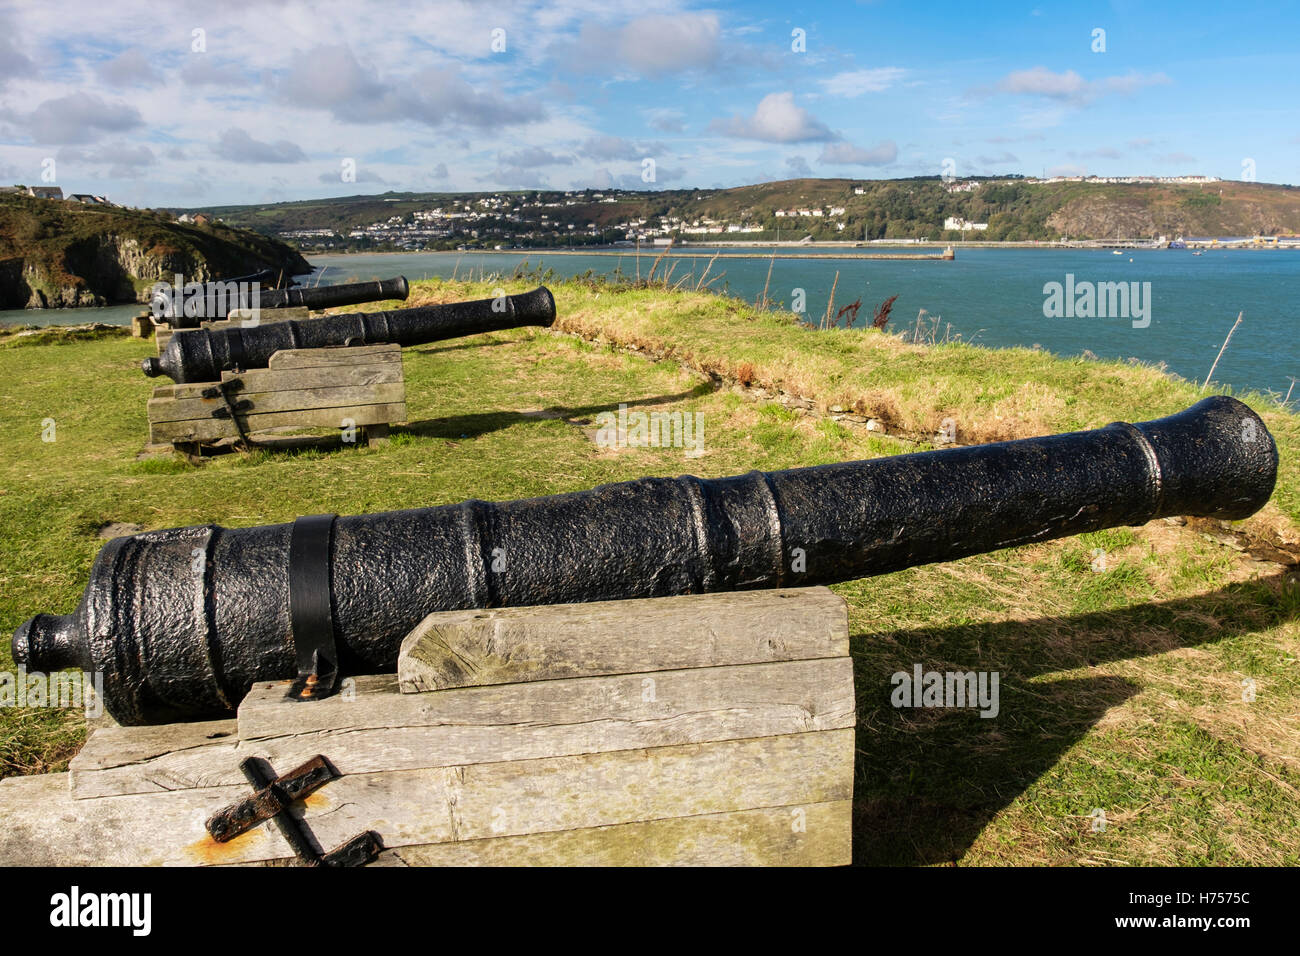 Old 9 pounder guns in 18th century fort ruins 1781 on a headland overlooking port. Fishguard, Pembrokeshire, Wales, UK, Britain Stock Photo